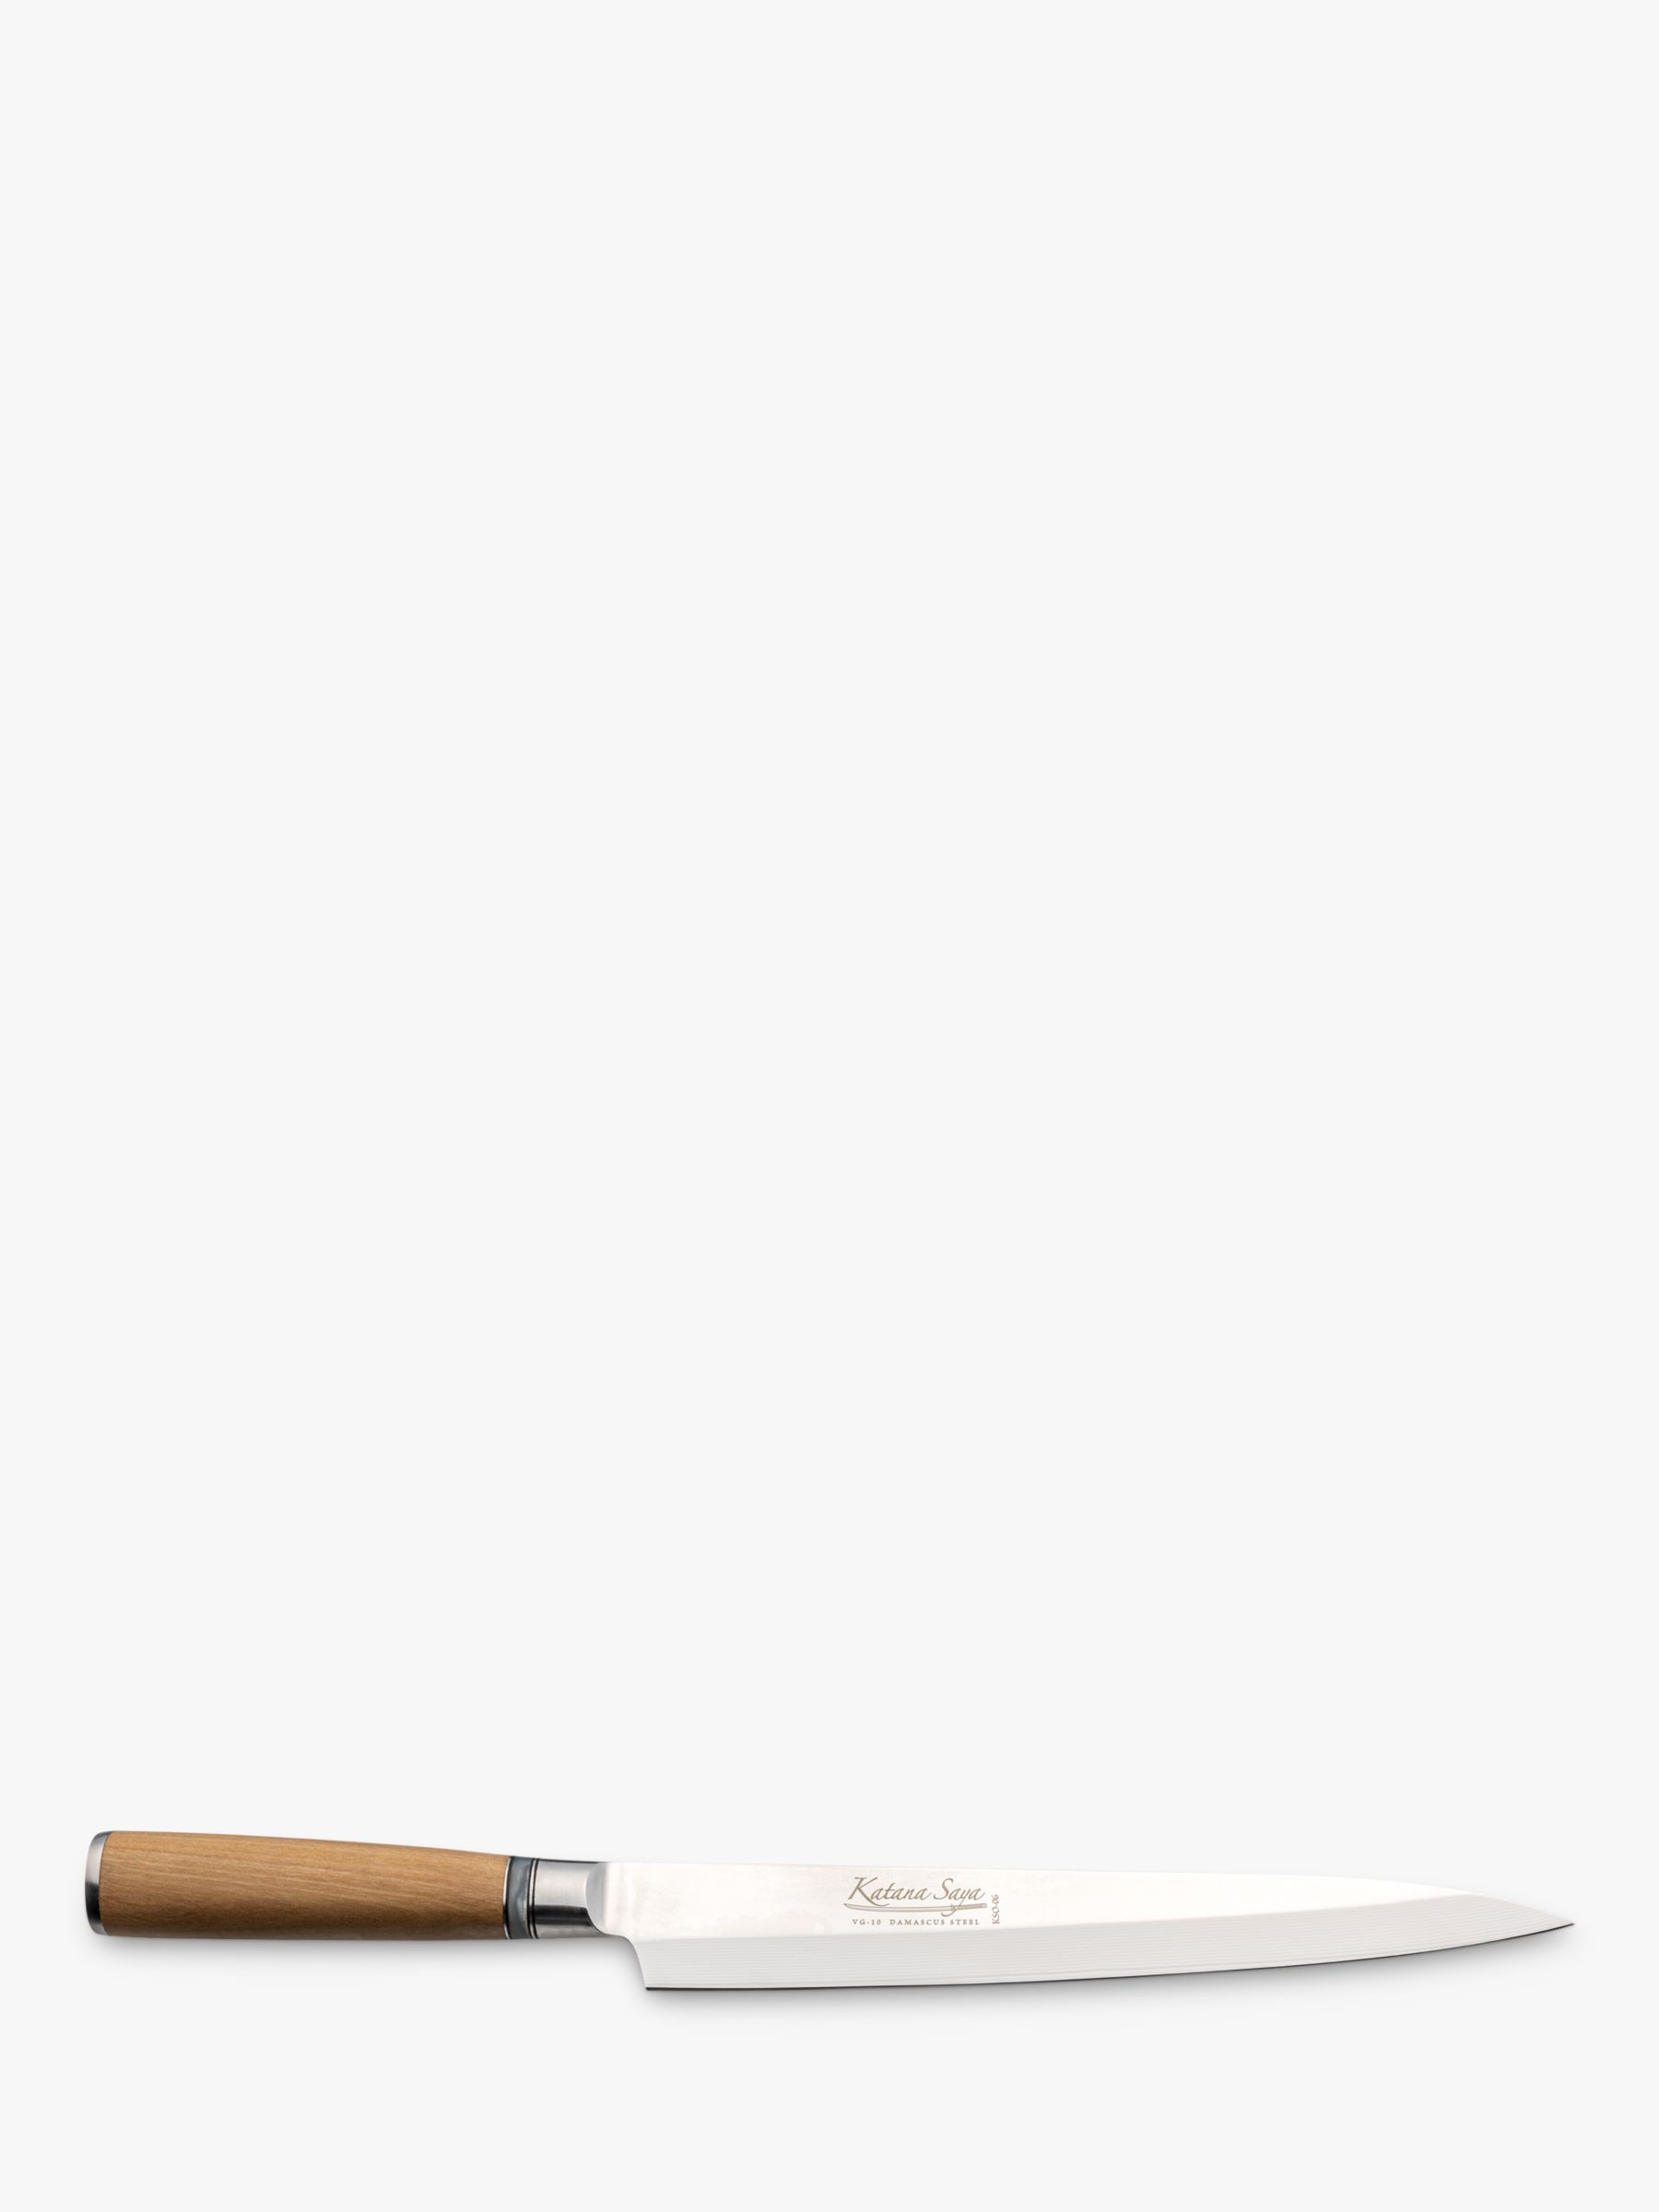 Jean-Patrique Kitchen Utility Knife - 5 A Razor-Sharp and Highly Versatile All-Rounder Kitchen Knife. Carving Knife, Chopping Knife Cheese Knife